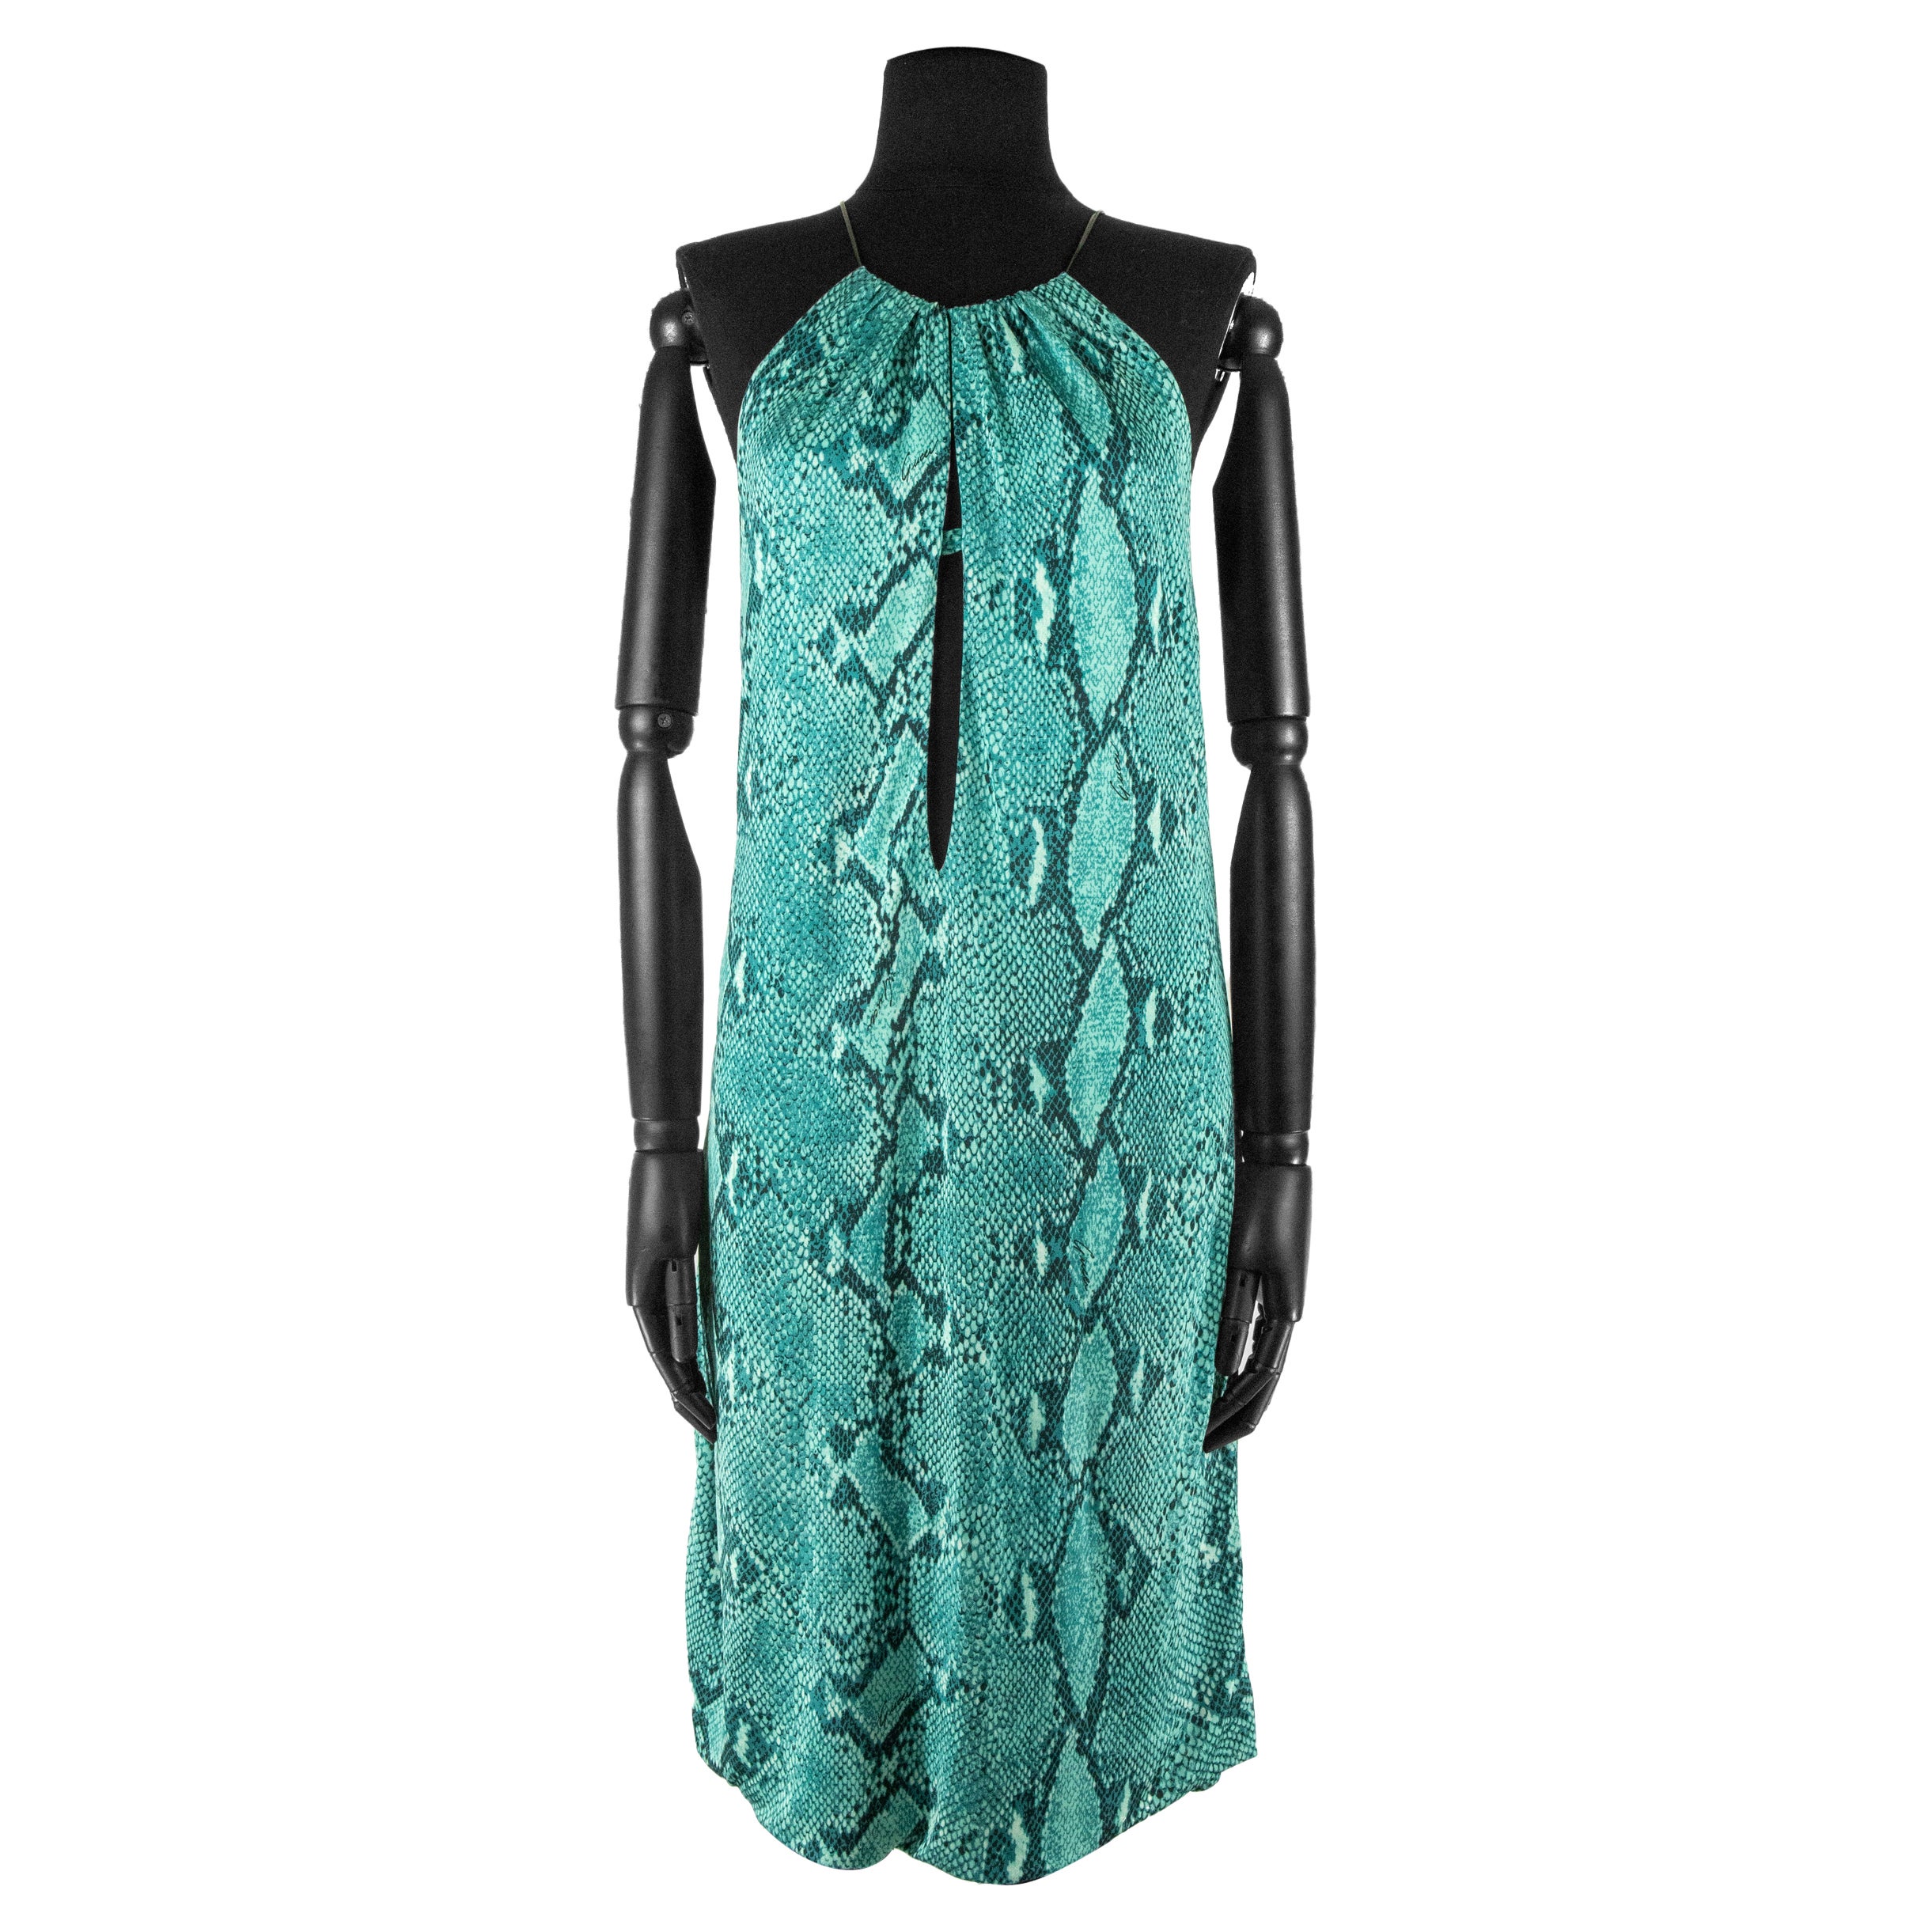 Spring 2000 Gucci by Tom Ford Green, Turquoise And Black Snakeskin Print Dress